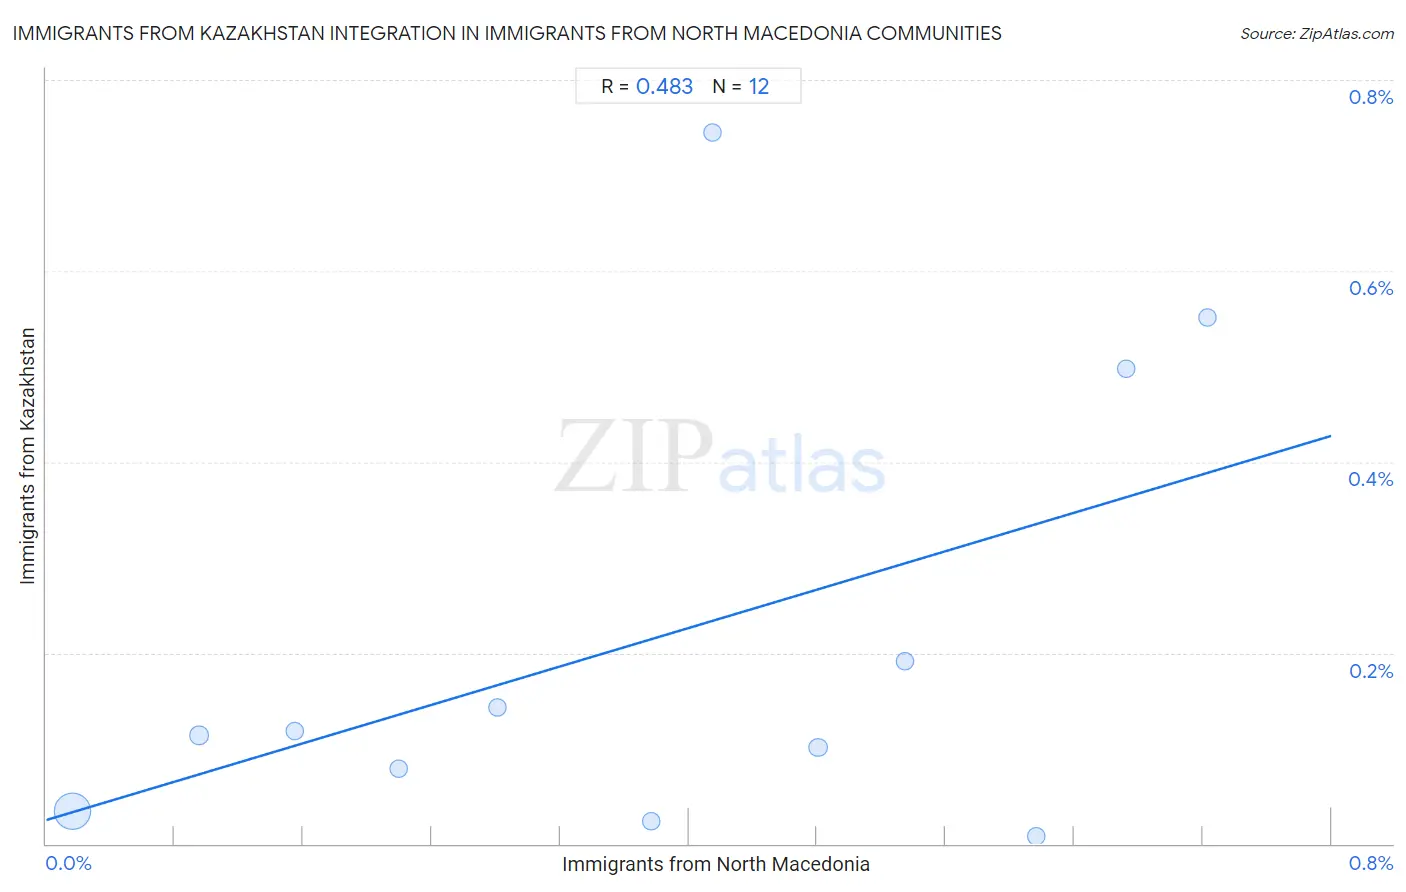 Immigrants from North Macedonia Integration in Immigrants from Kazakhstan Communities